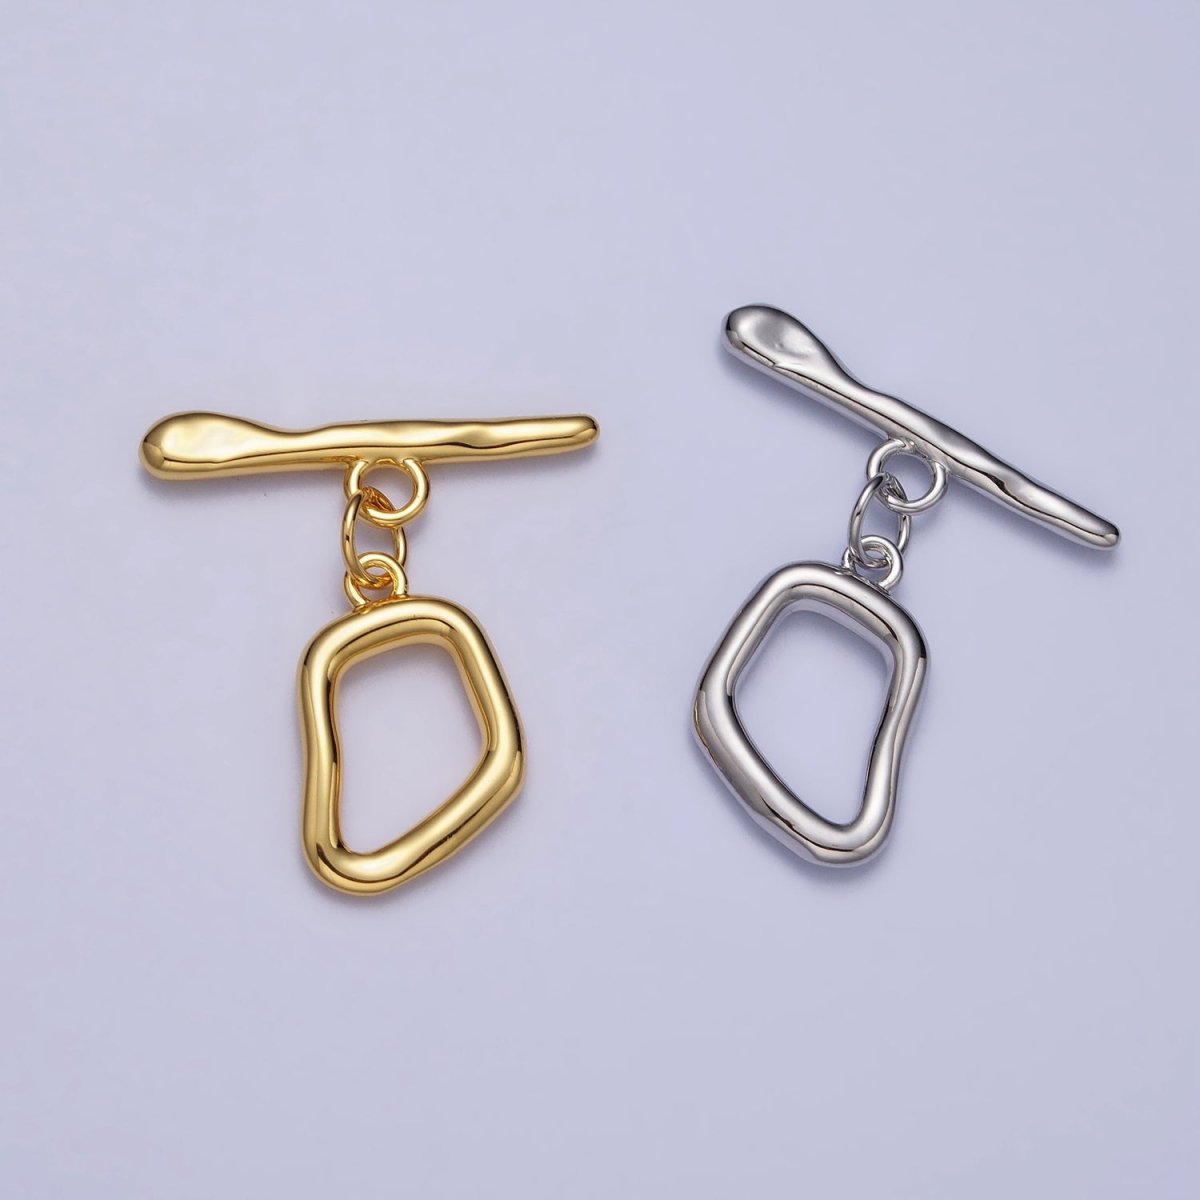 Hammered Geometric Toggle Clasps Jewelry Closure Supply in Matte, Silver, Gold | Z-088 Z-089 Z--097 - DLUXCA